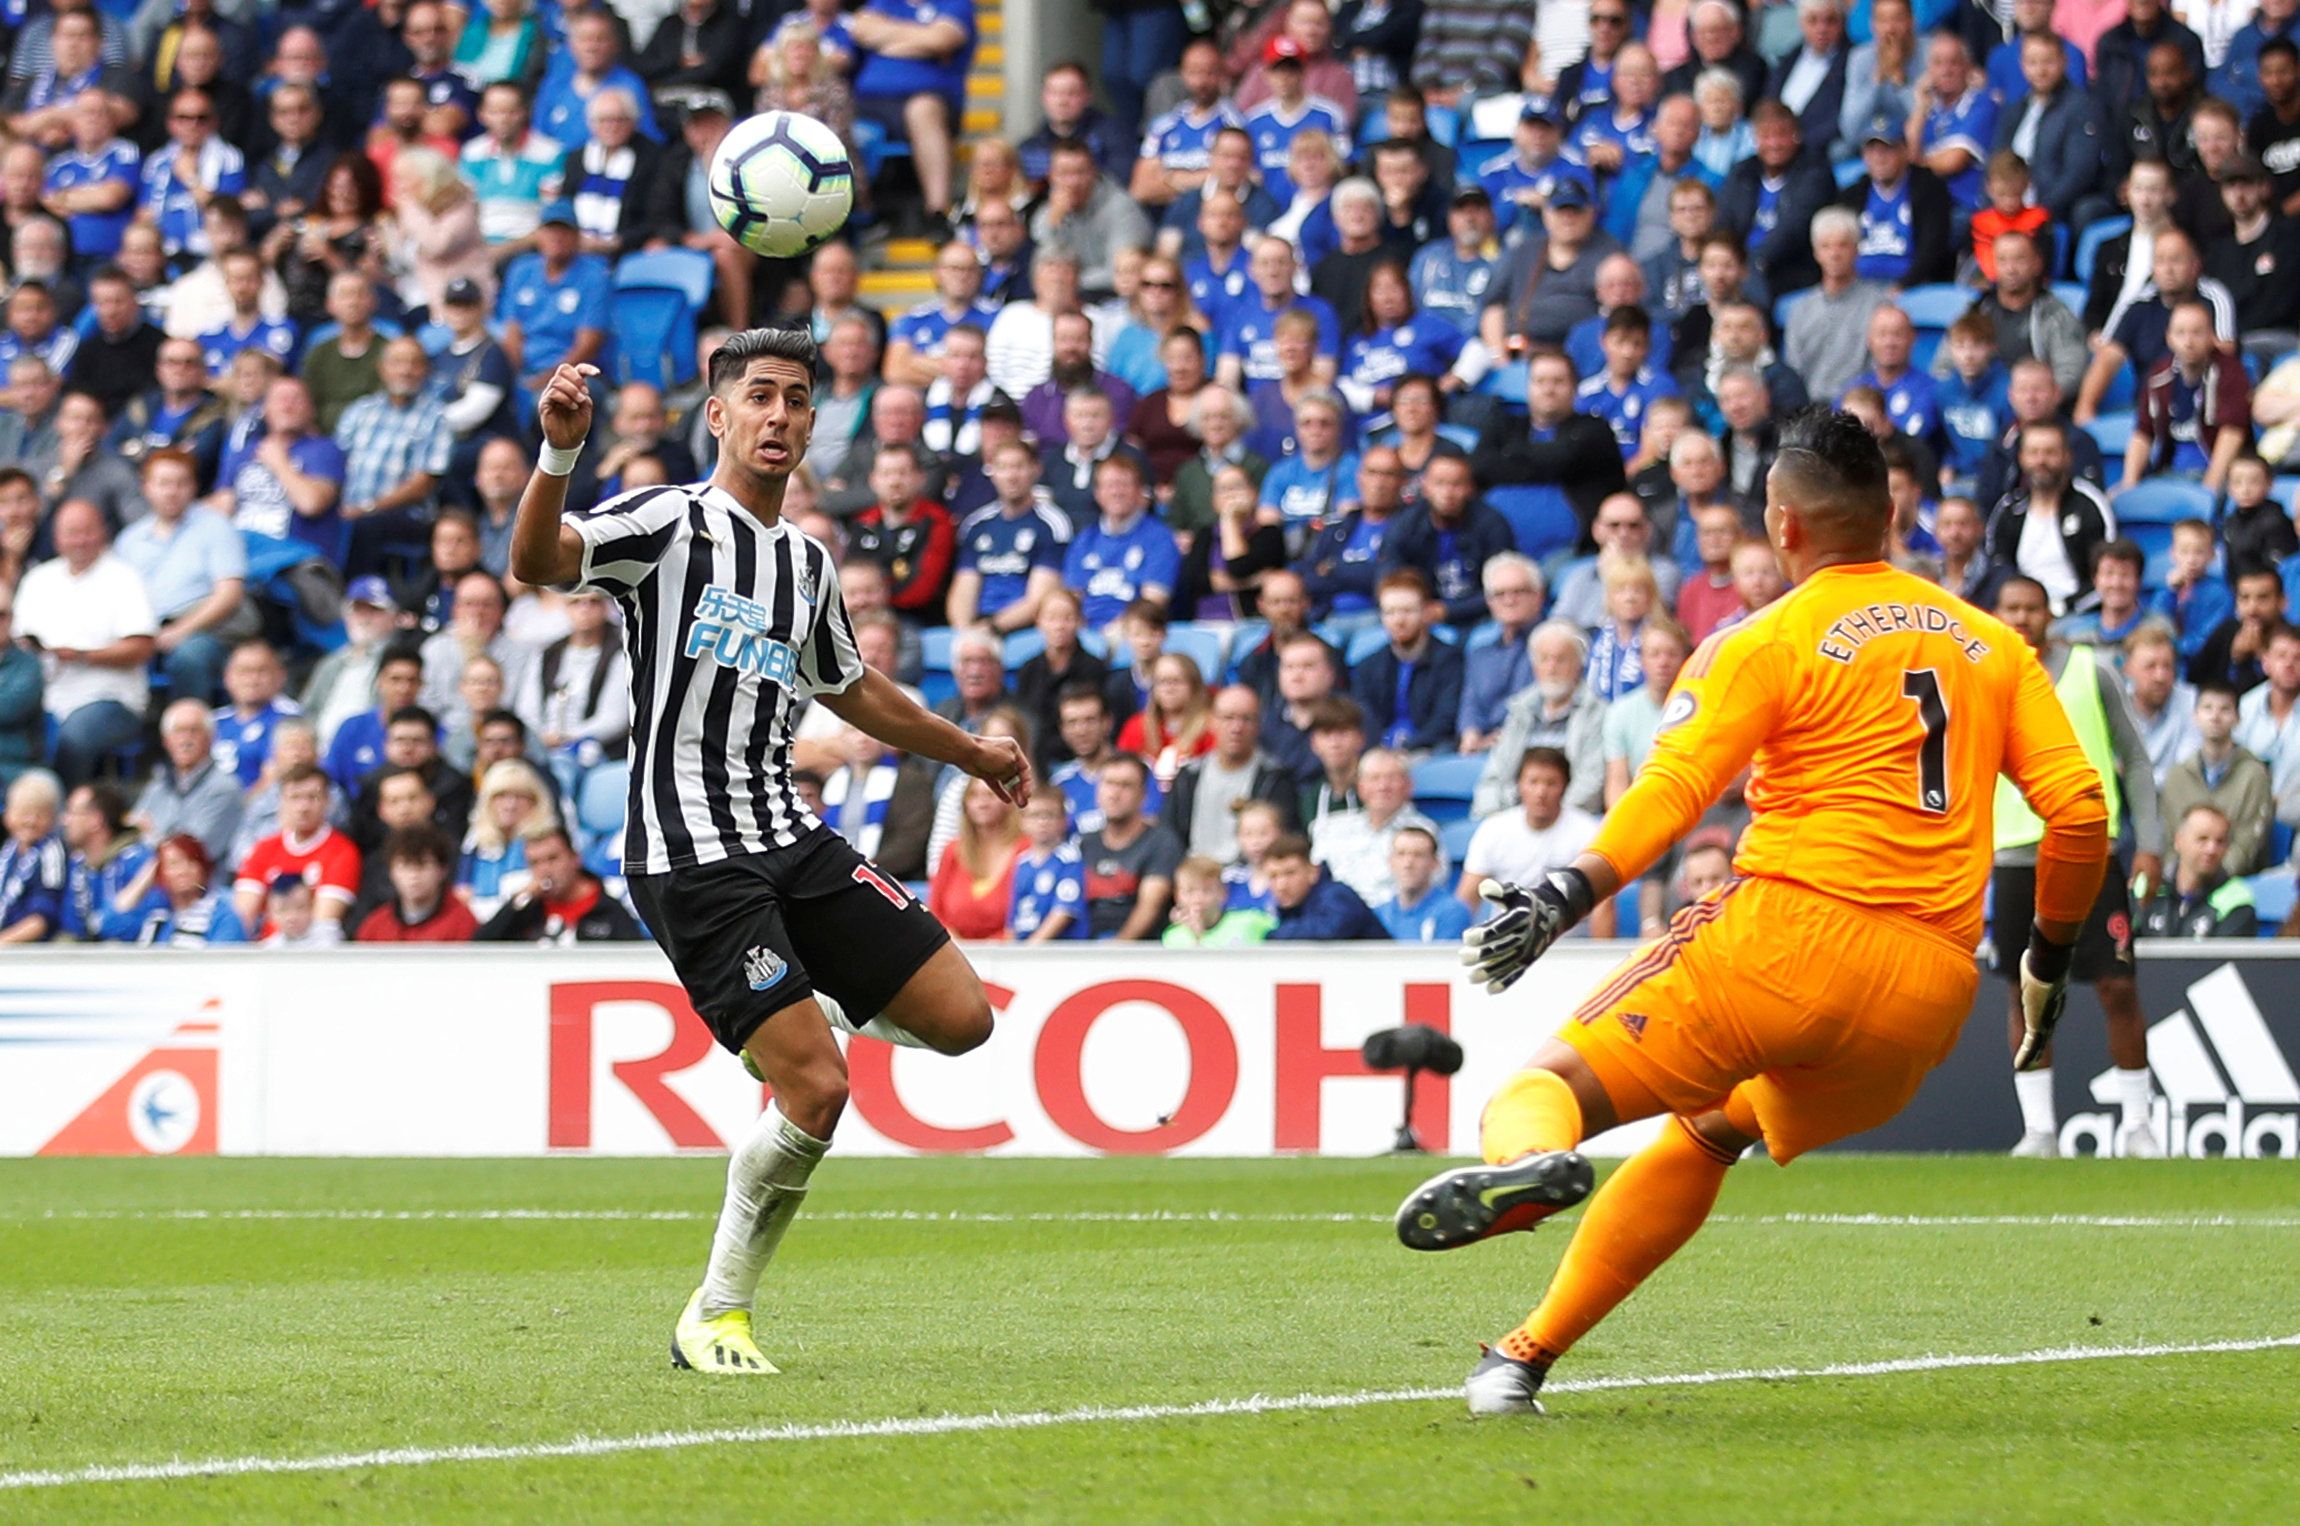 Soccer Football - Premier League - Cardiff City v Newcastle United- Cardiff City Stadium, Cardiff, Britain - August 18, 2018   Newcastle United's Ayoze Perez in action with Cardiff City's Neil Etheridge    Action Images via Reuters/Carl Recine    EDITORIAL USE ONLY. No use with unauthorized audio, video, data, fixture lists, club/league logos or 